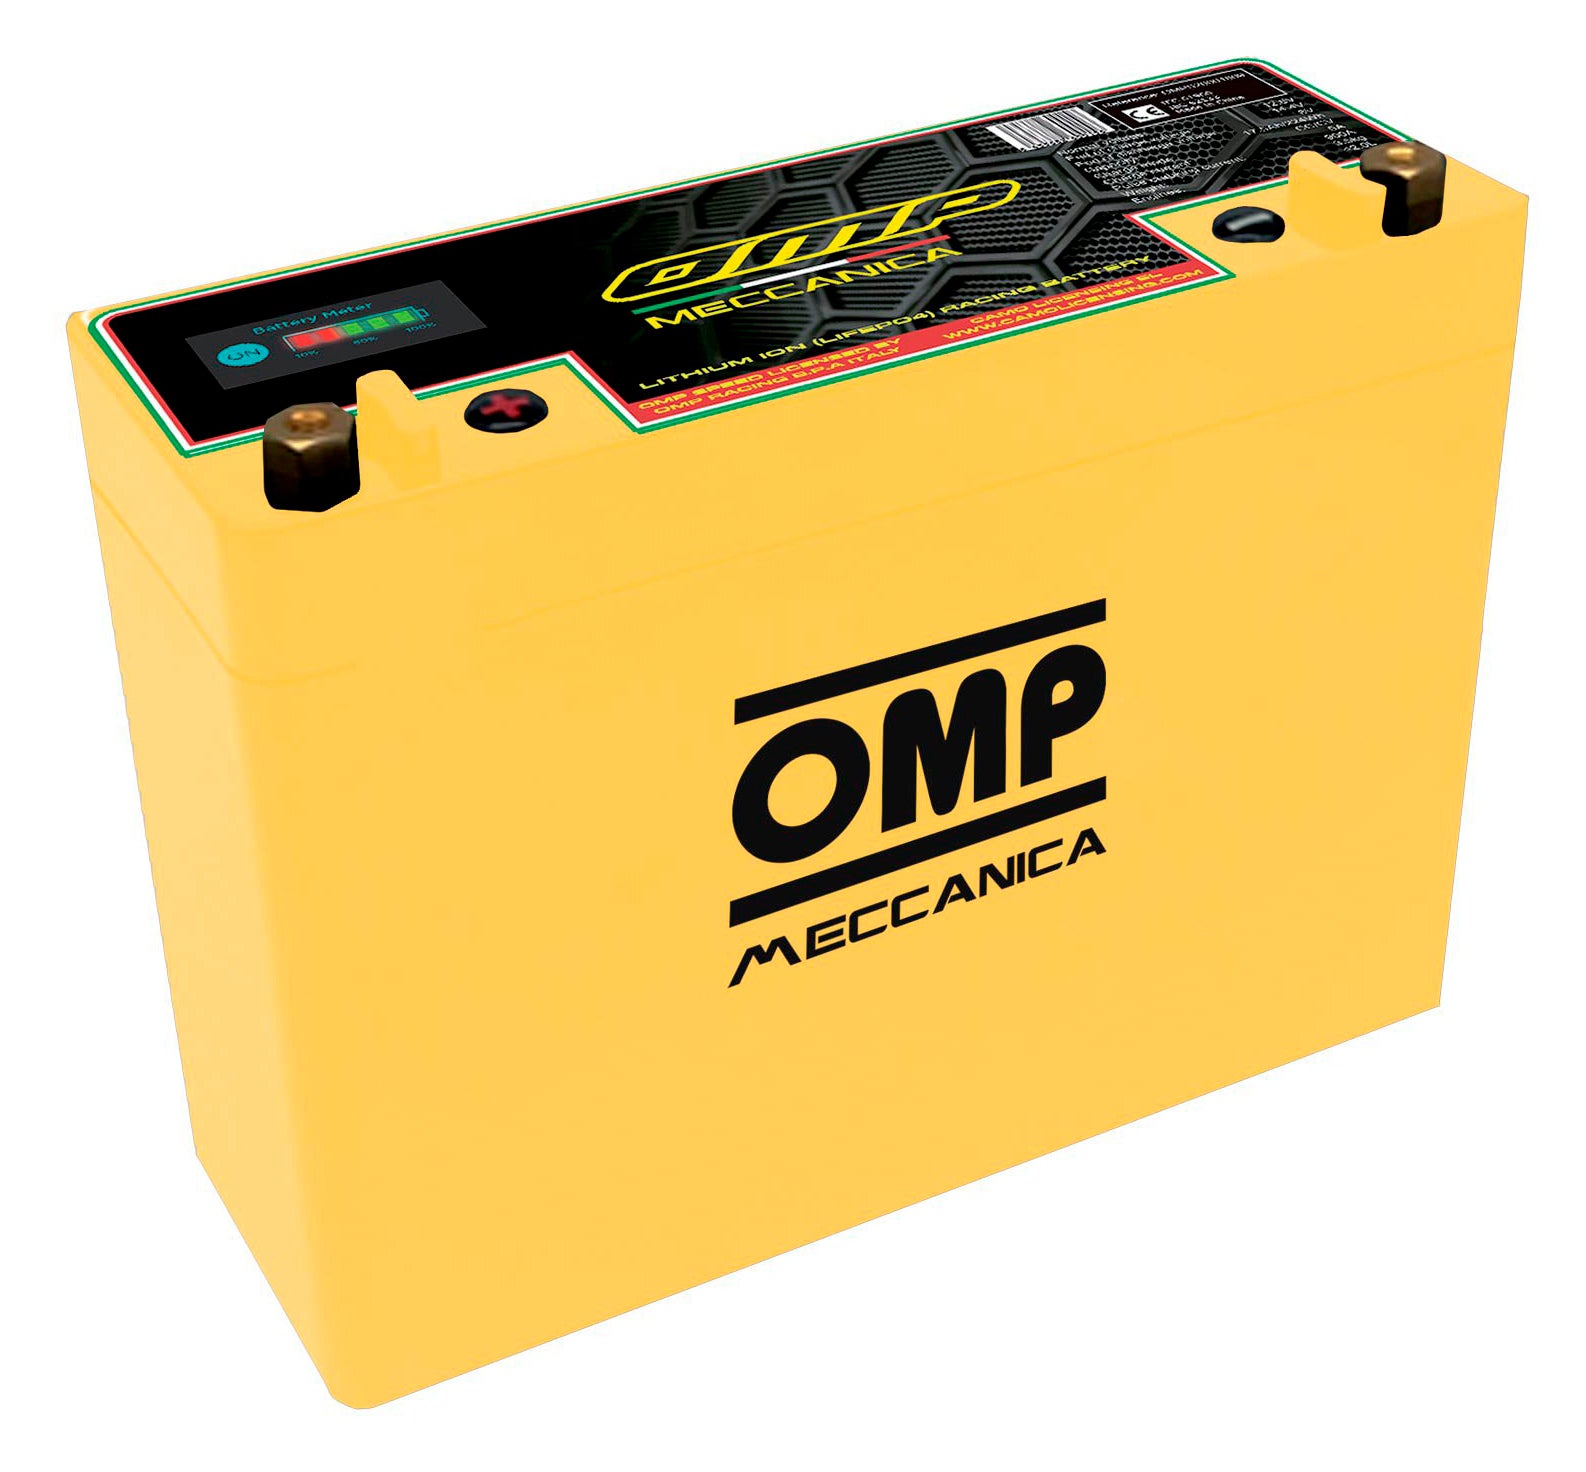 OMP OMPS20001809 Lithium Battery for cars with Alternator, 18AH/230WH, PCC 900A, Weight 3.5KG, For cars upto 2000CC Photo-0 